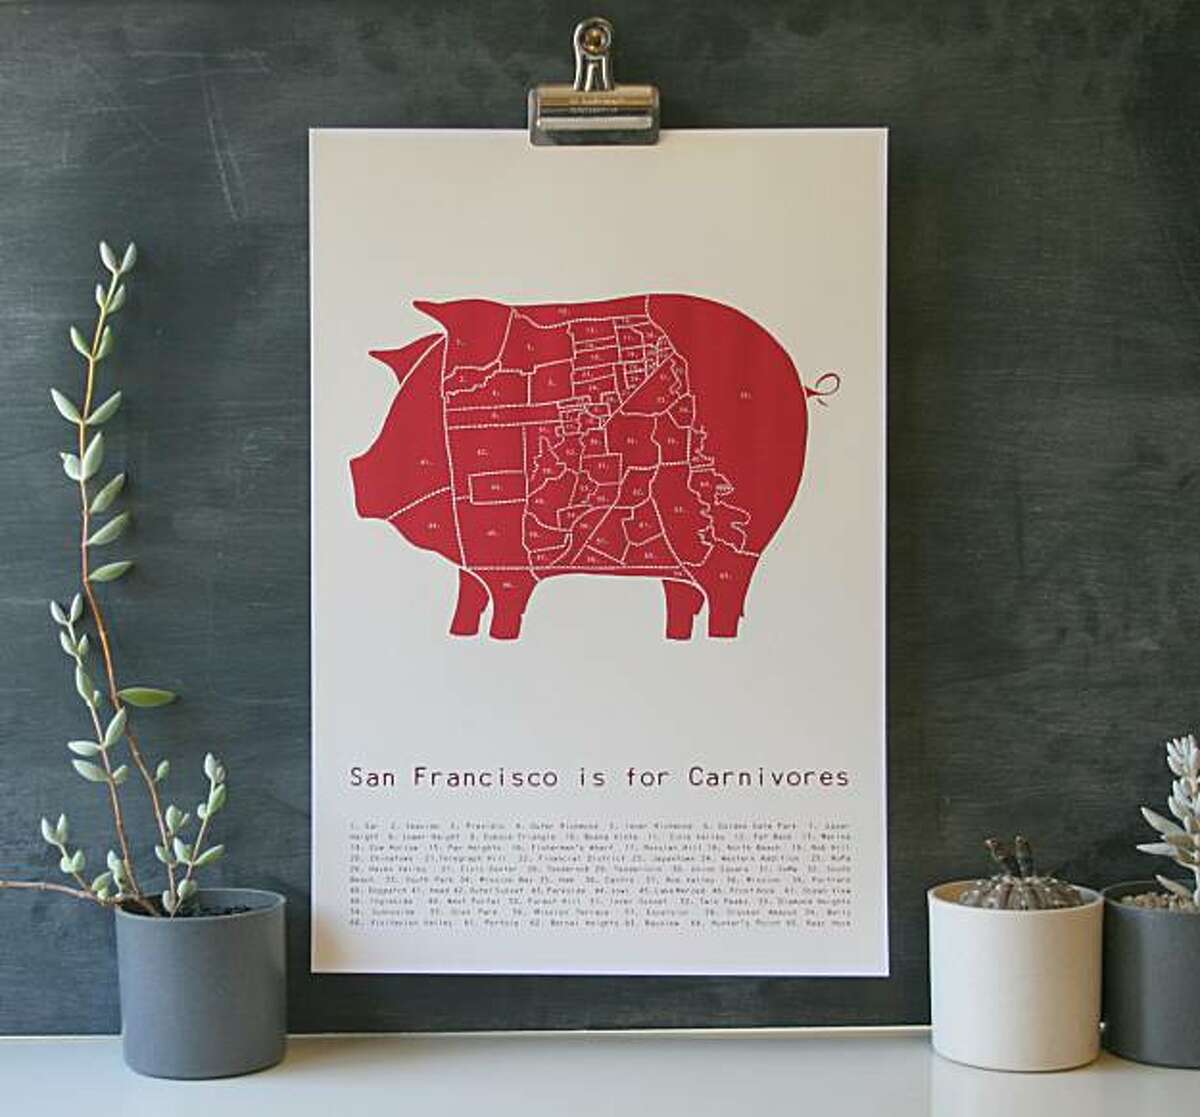 “San Francisco is for Carnivores” by Alyson Thomas of Drywell Art